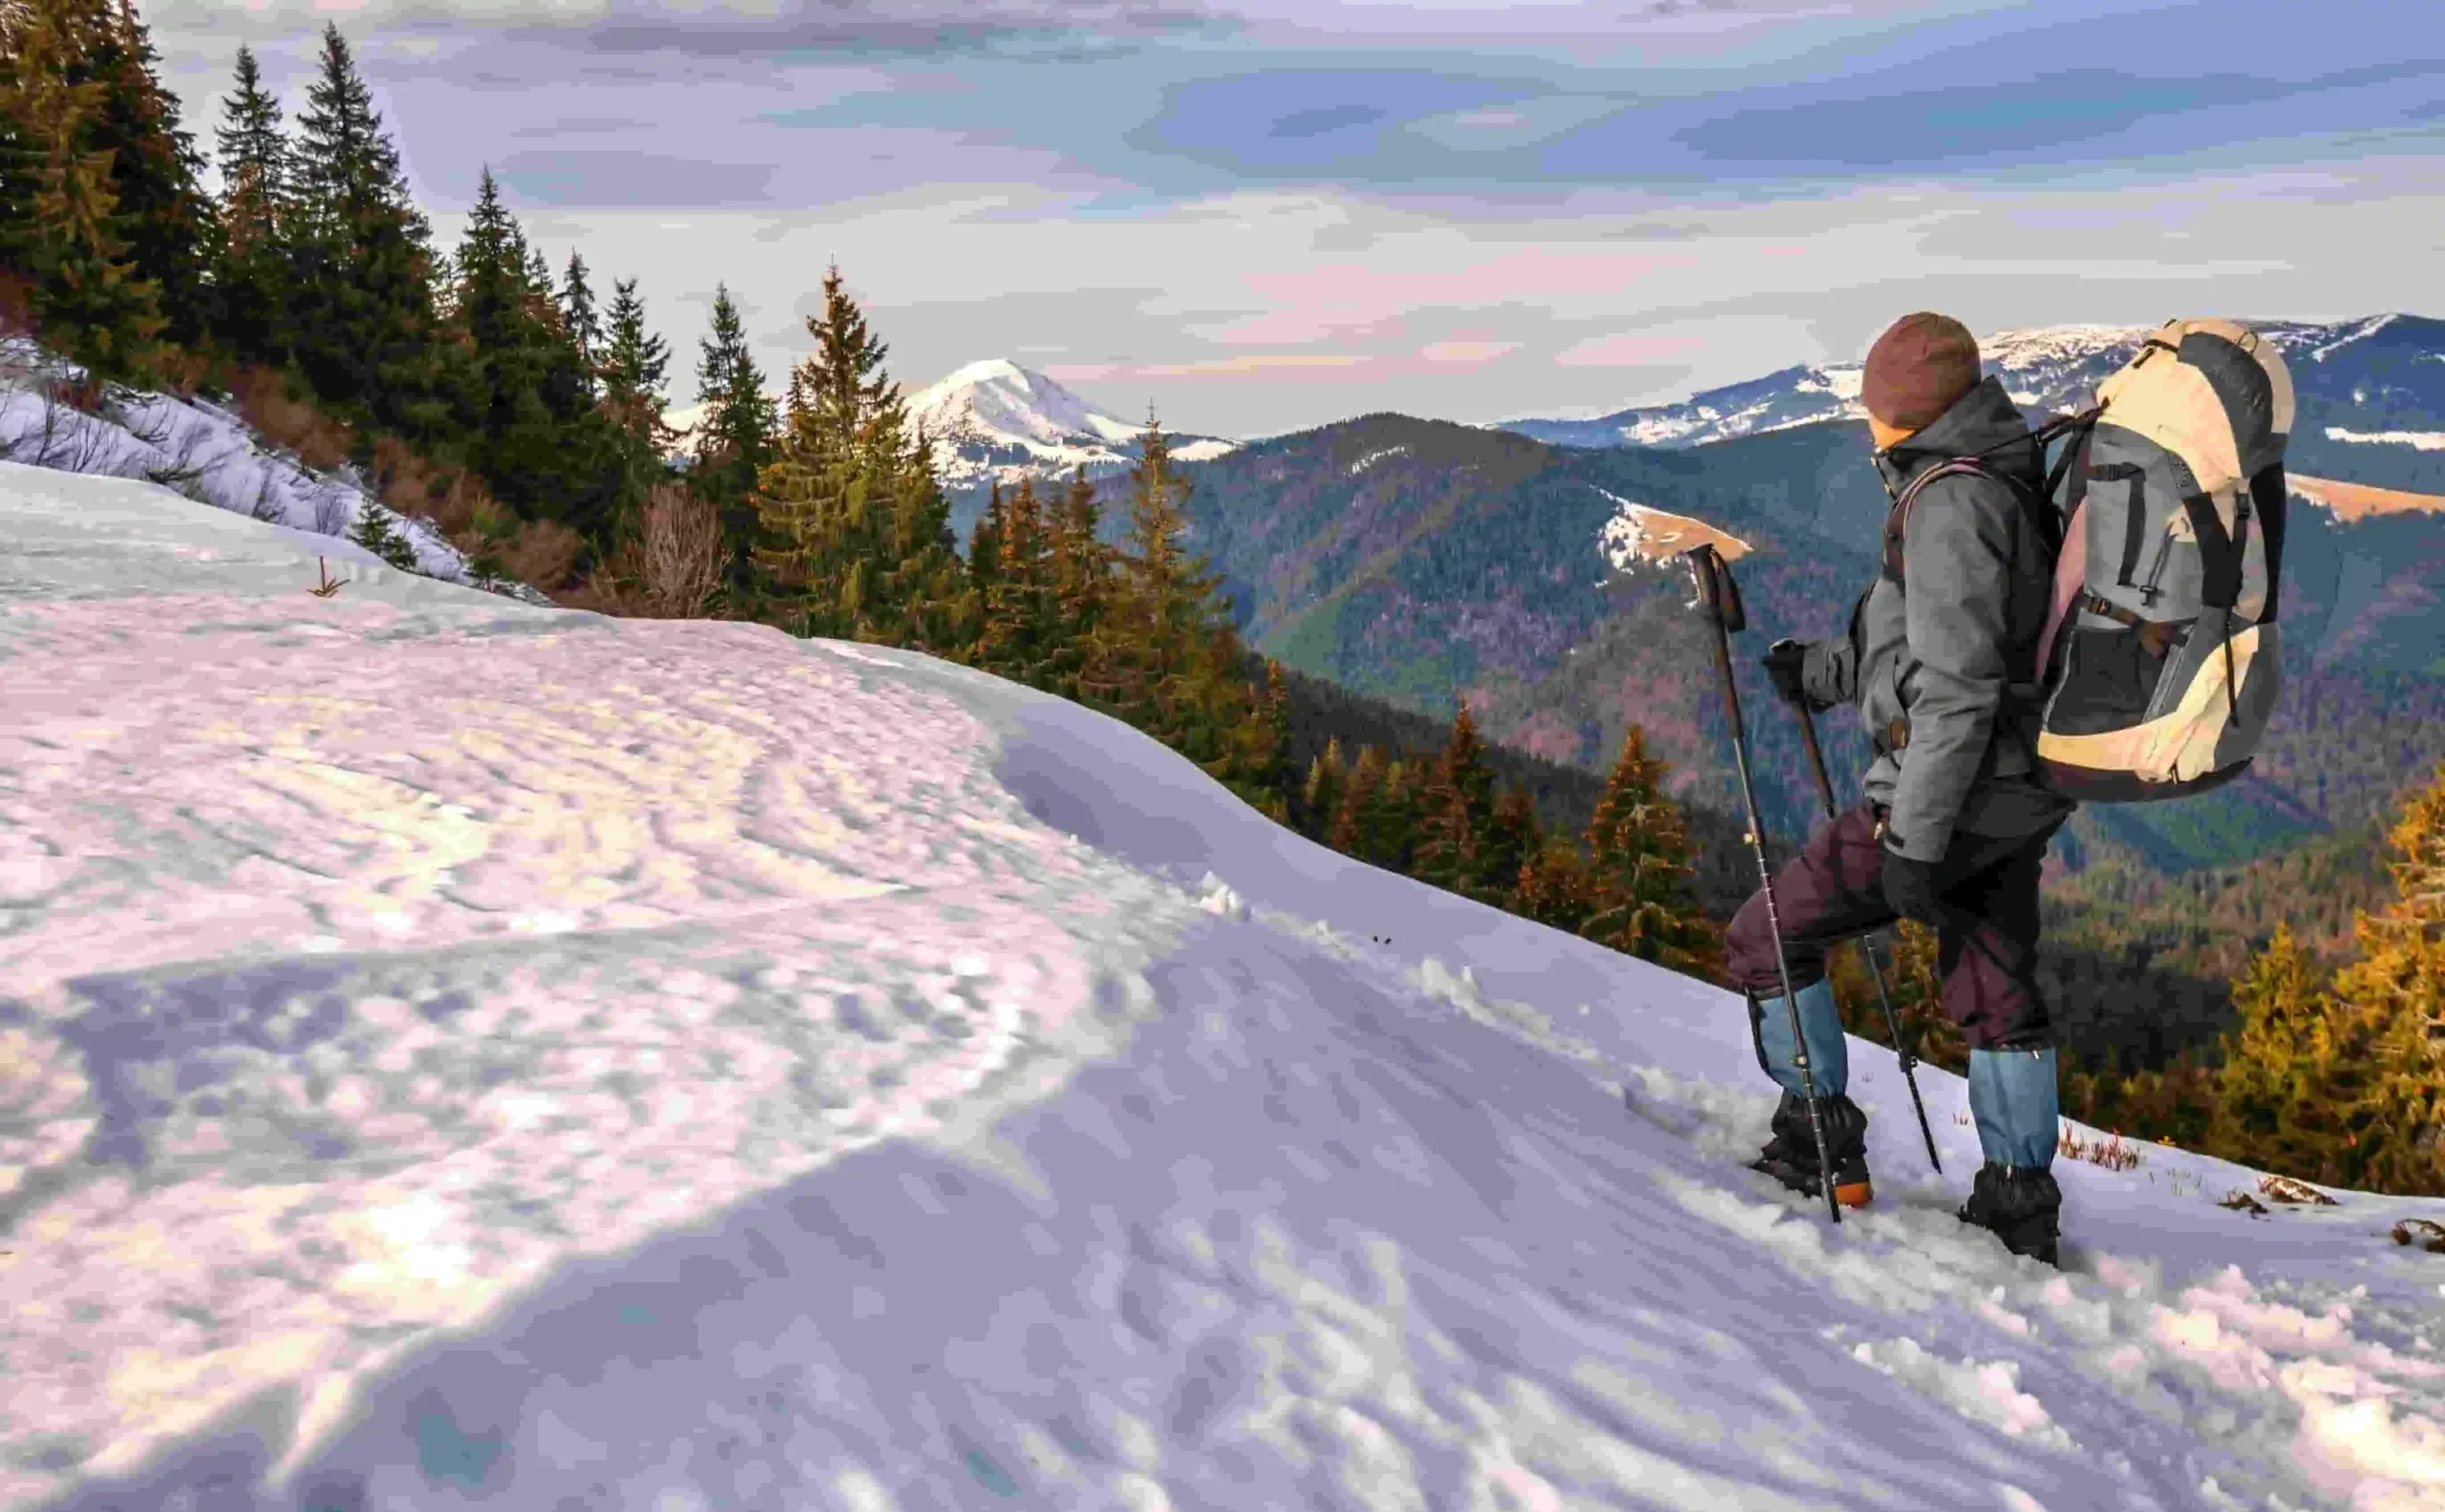 Dreamy Snowshoeing Destinations Globally that Need High-Quality Snowshoes Women, Men, and Kids